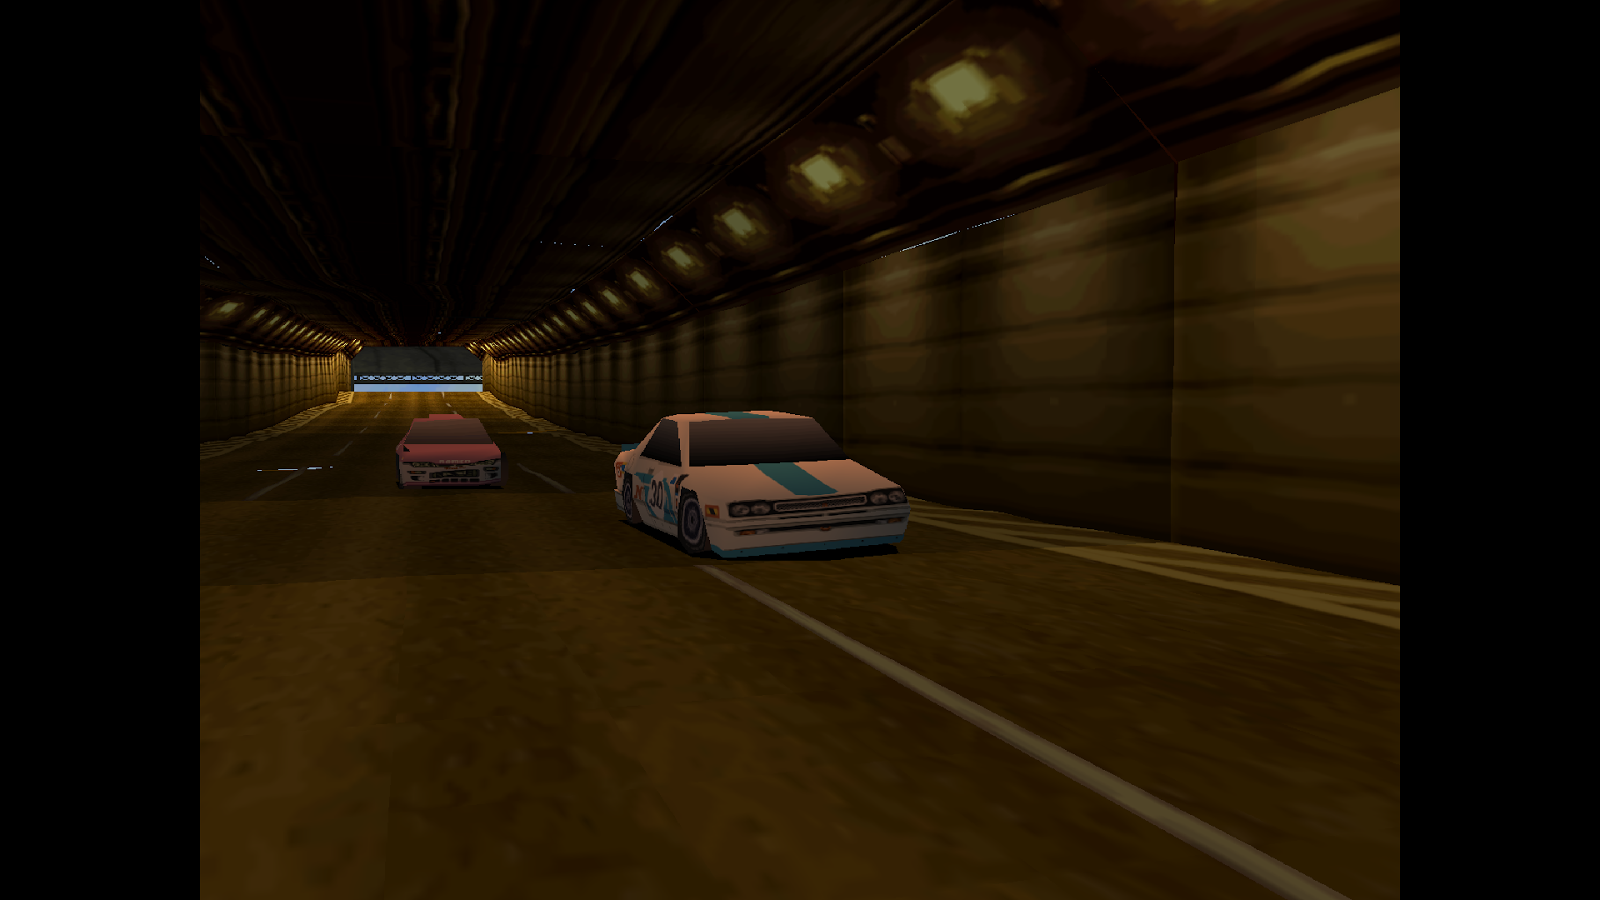 ViDEO GAME GiFS — playstationpark: Tunnel Time 'Ridge Racer